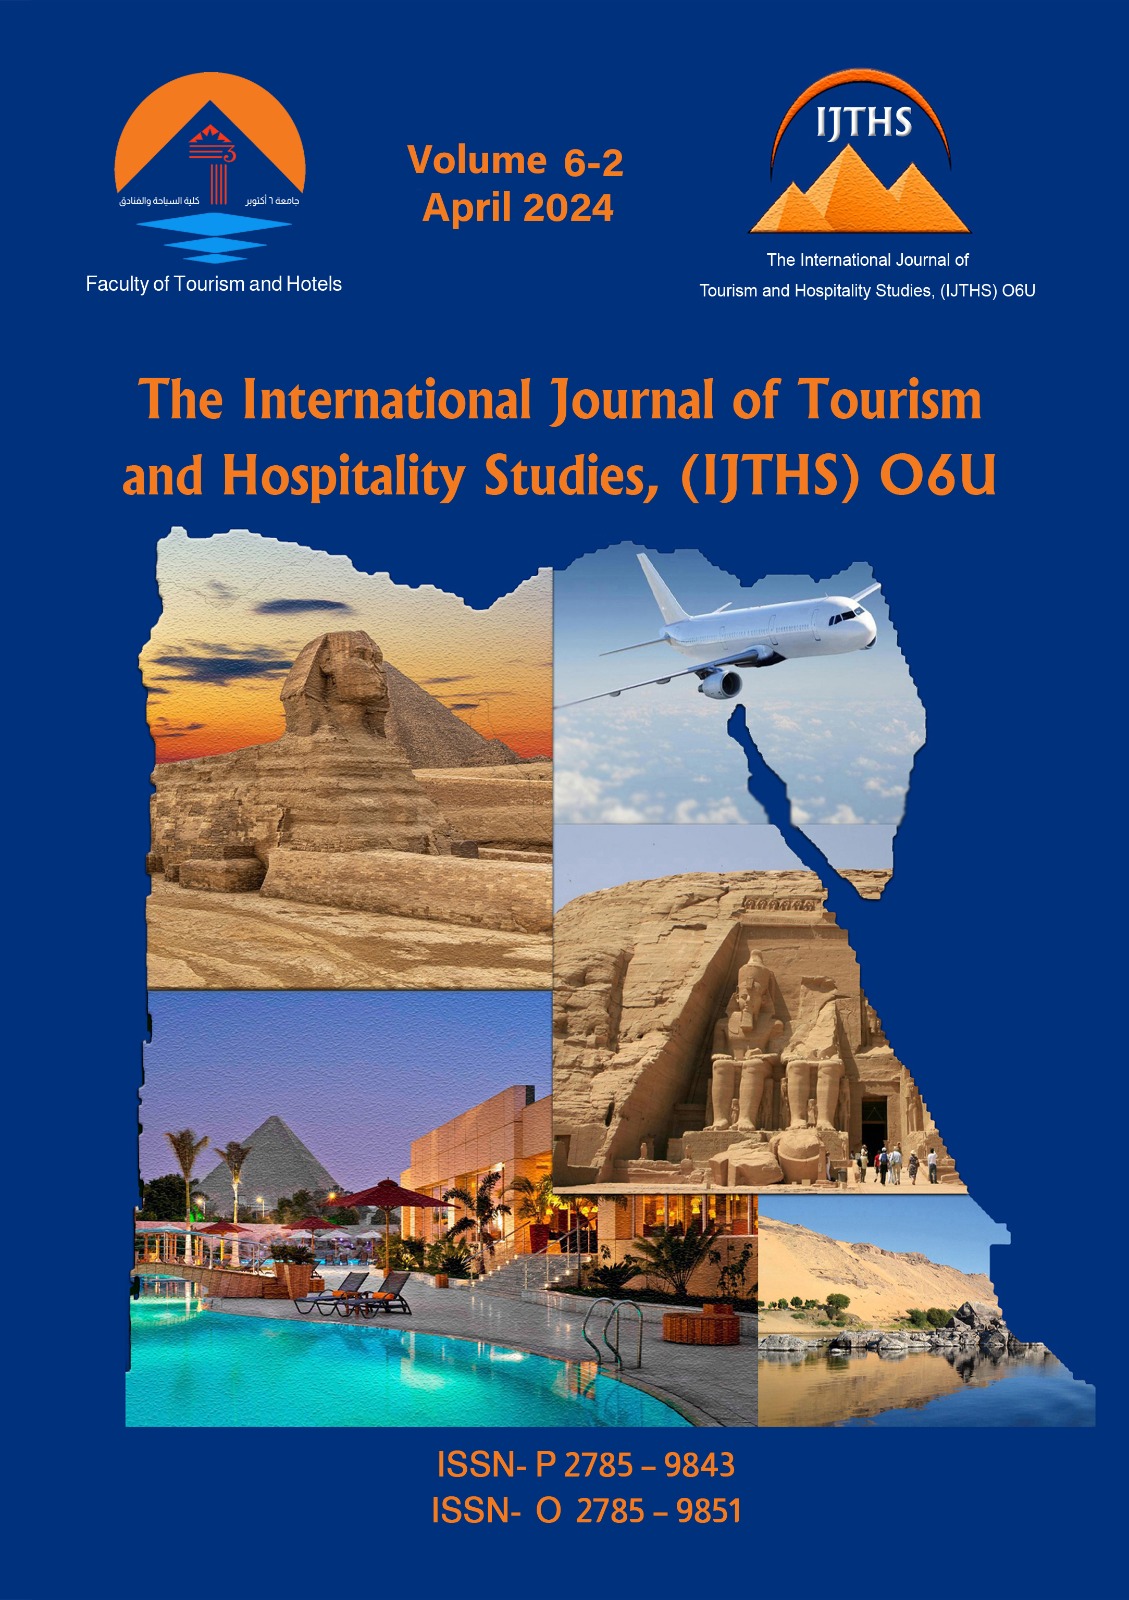 The International Journal of Tourism and Hospitality Studies